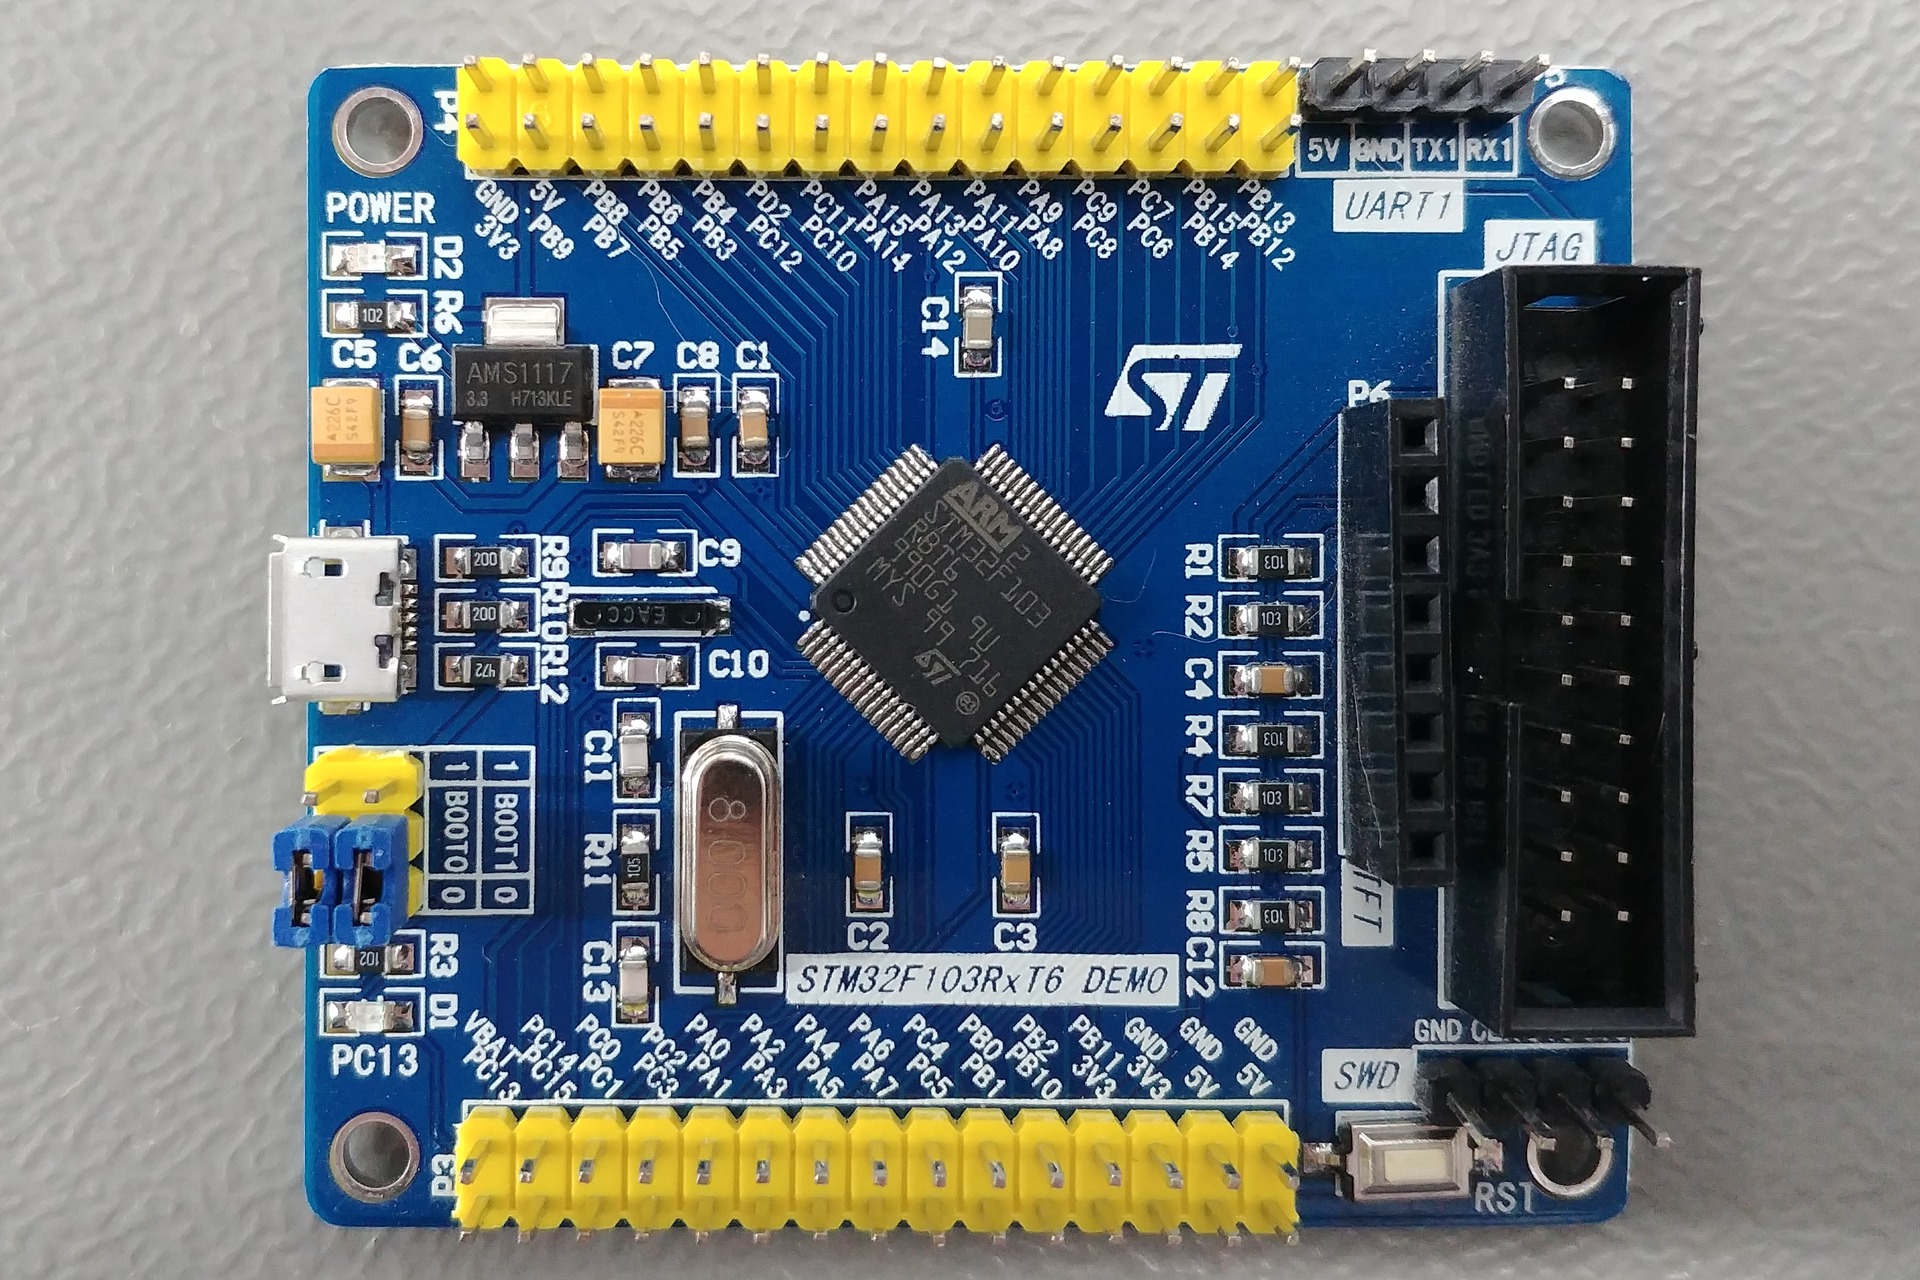 STM32F103RxT6 DEMO: Top view